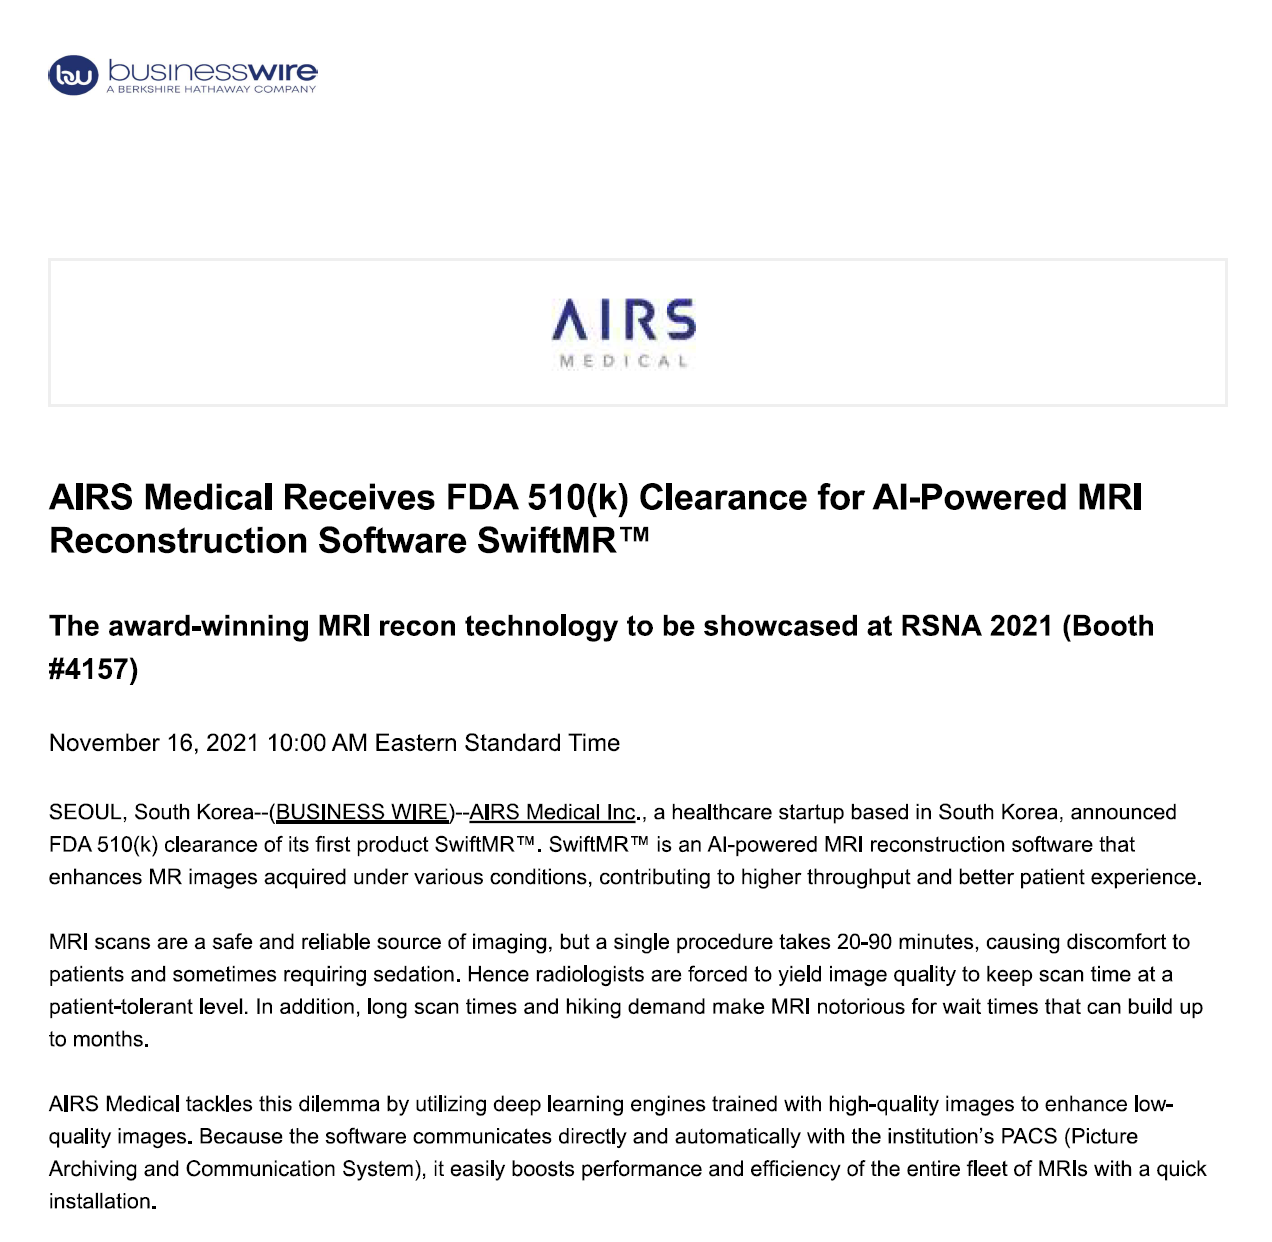 AIRS Medical Receives FDA 510(k) Clearance for AI-Powered MRI Reconstruction Software SwiftMR™